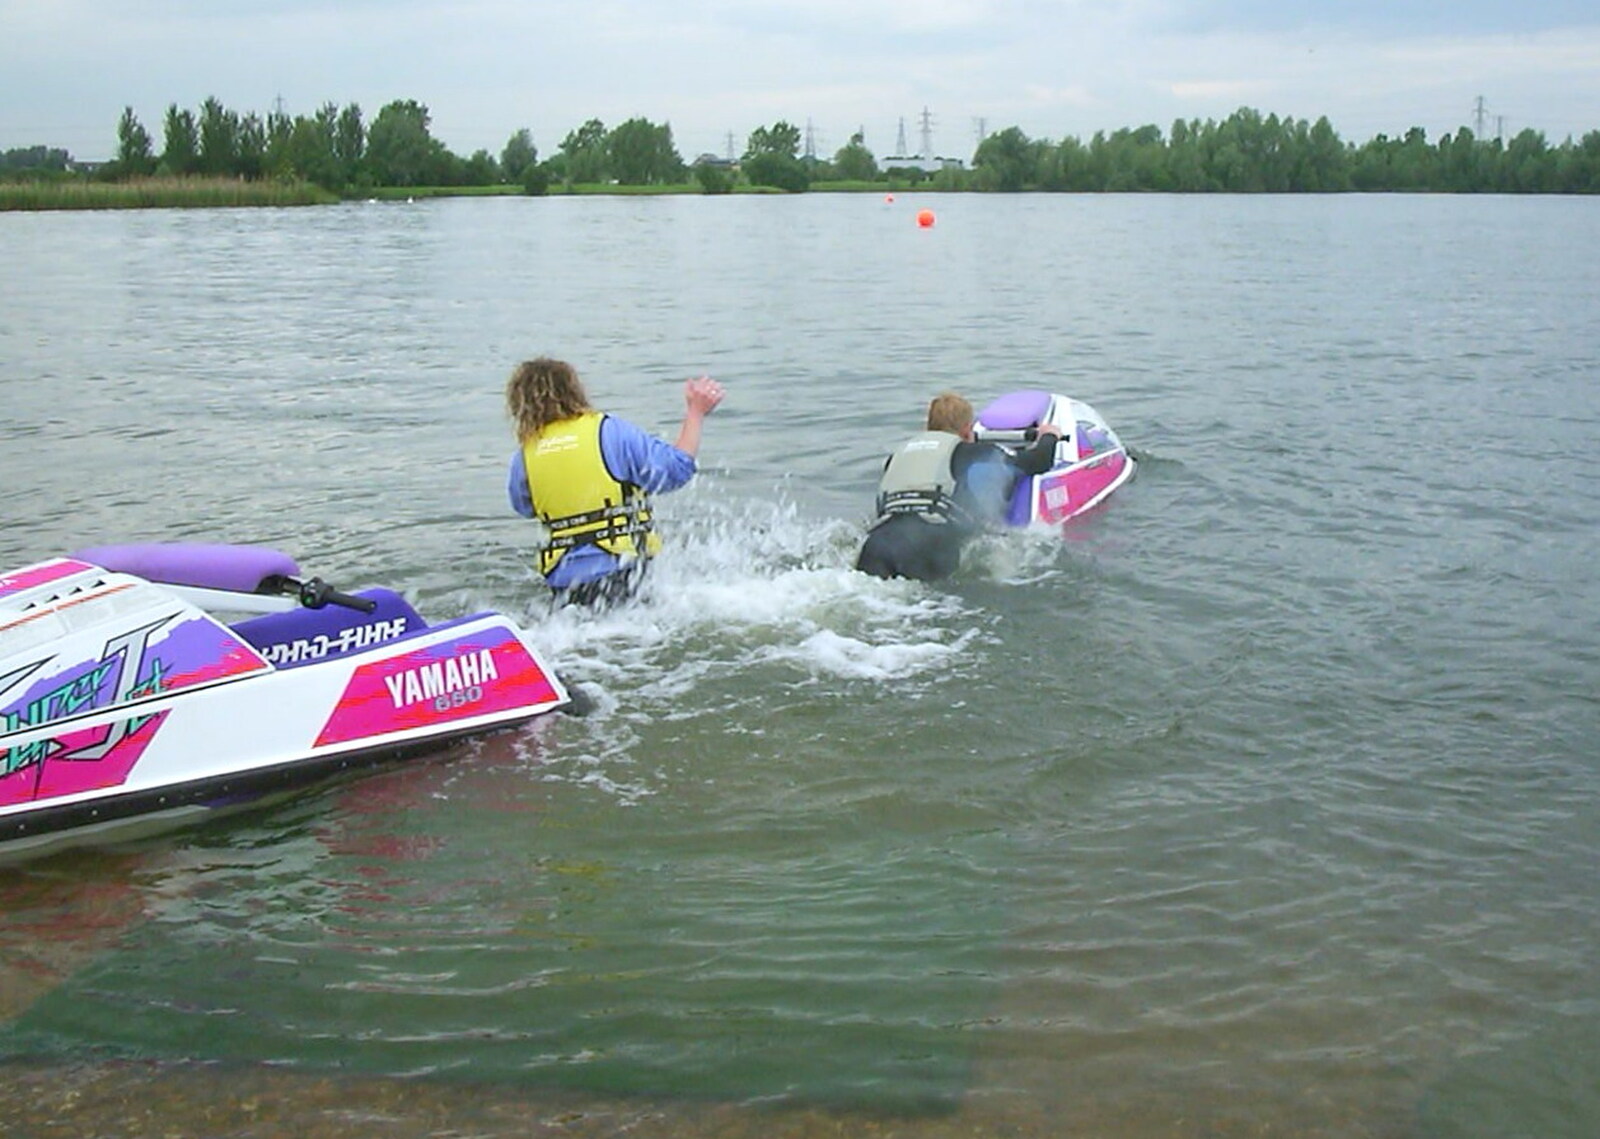 Steve roars off on a jet ski from 3G Lab Watersports Fun Day, Wyboston, Bedfordshire - 8th June 2002